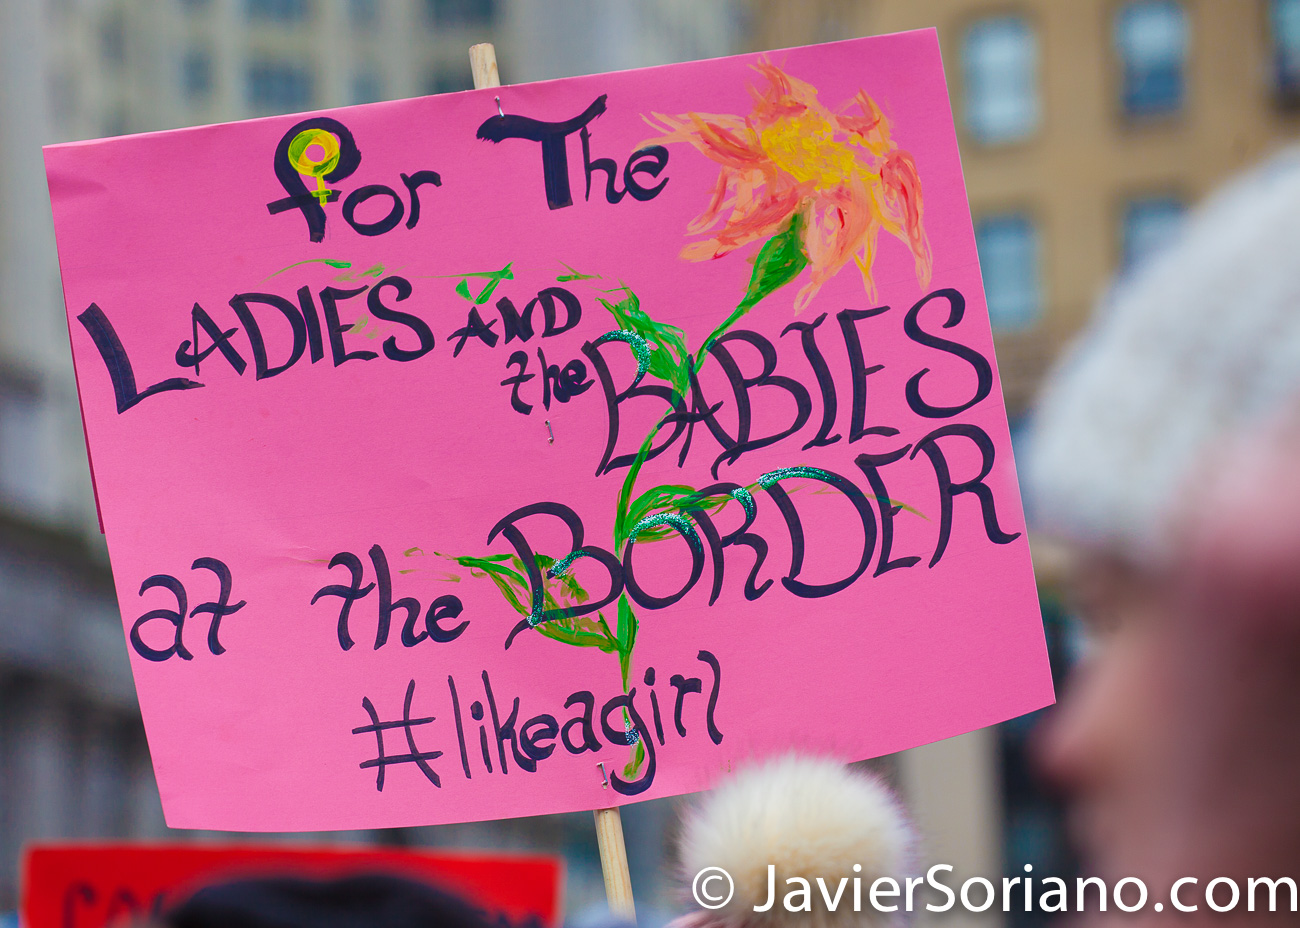 Foley Square, Manhattan. New York City. The third annual Women's March was on Saturday, January 19, 2019. Hundreds of people attended the rally at Foley Square Park in suppport of women's rights. The sign says: "For the ladies and the babies at the border. #LikeAGirl" ("Para las damas y l@s bebés en la frontera") Photo by Javier Soriano/JavierSoriano.com